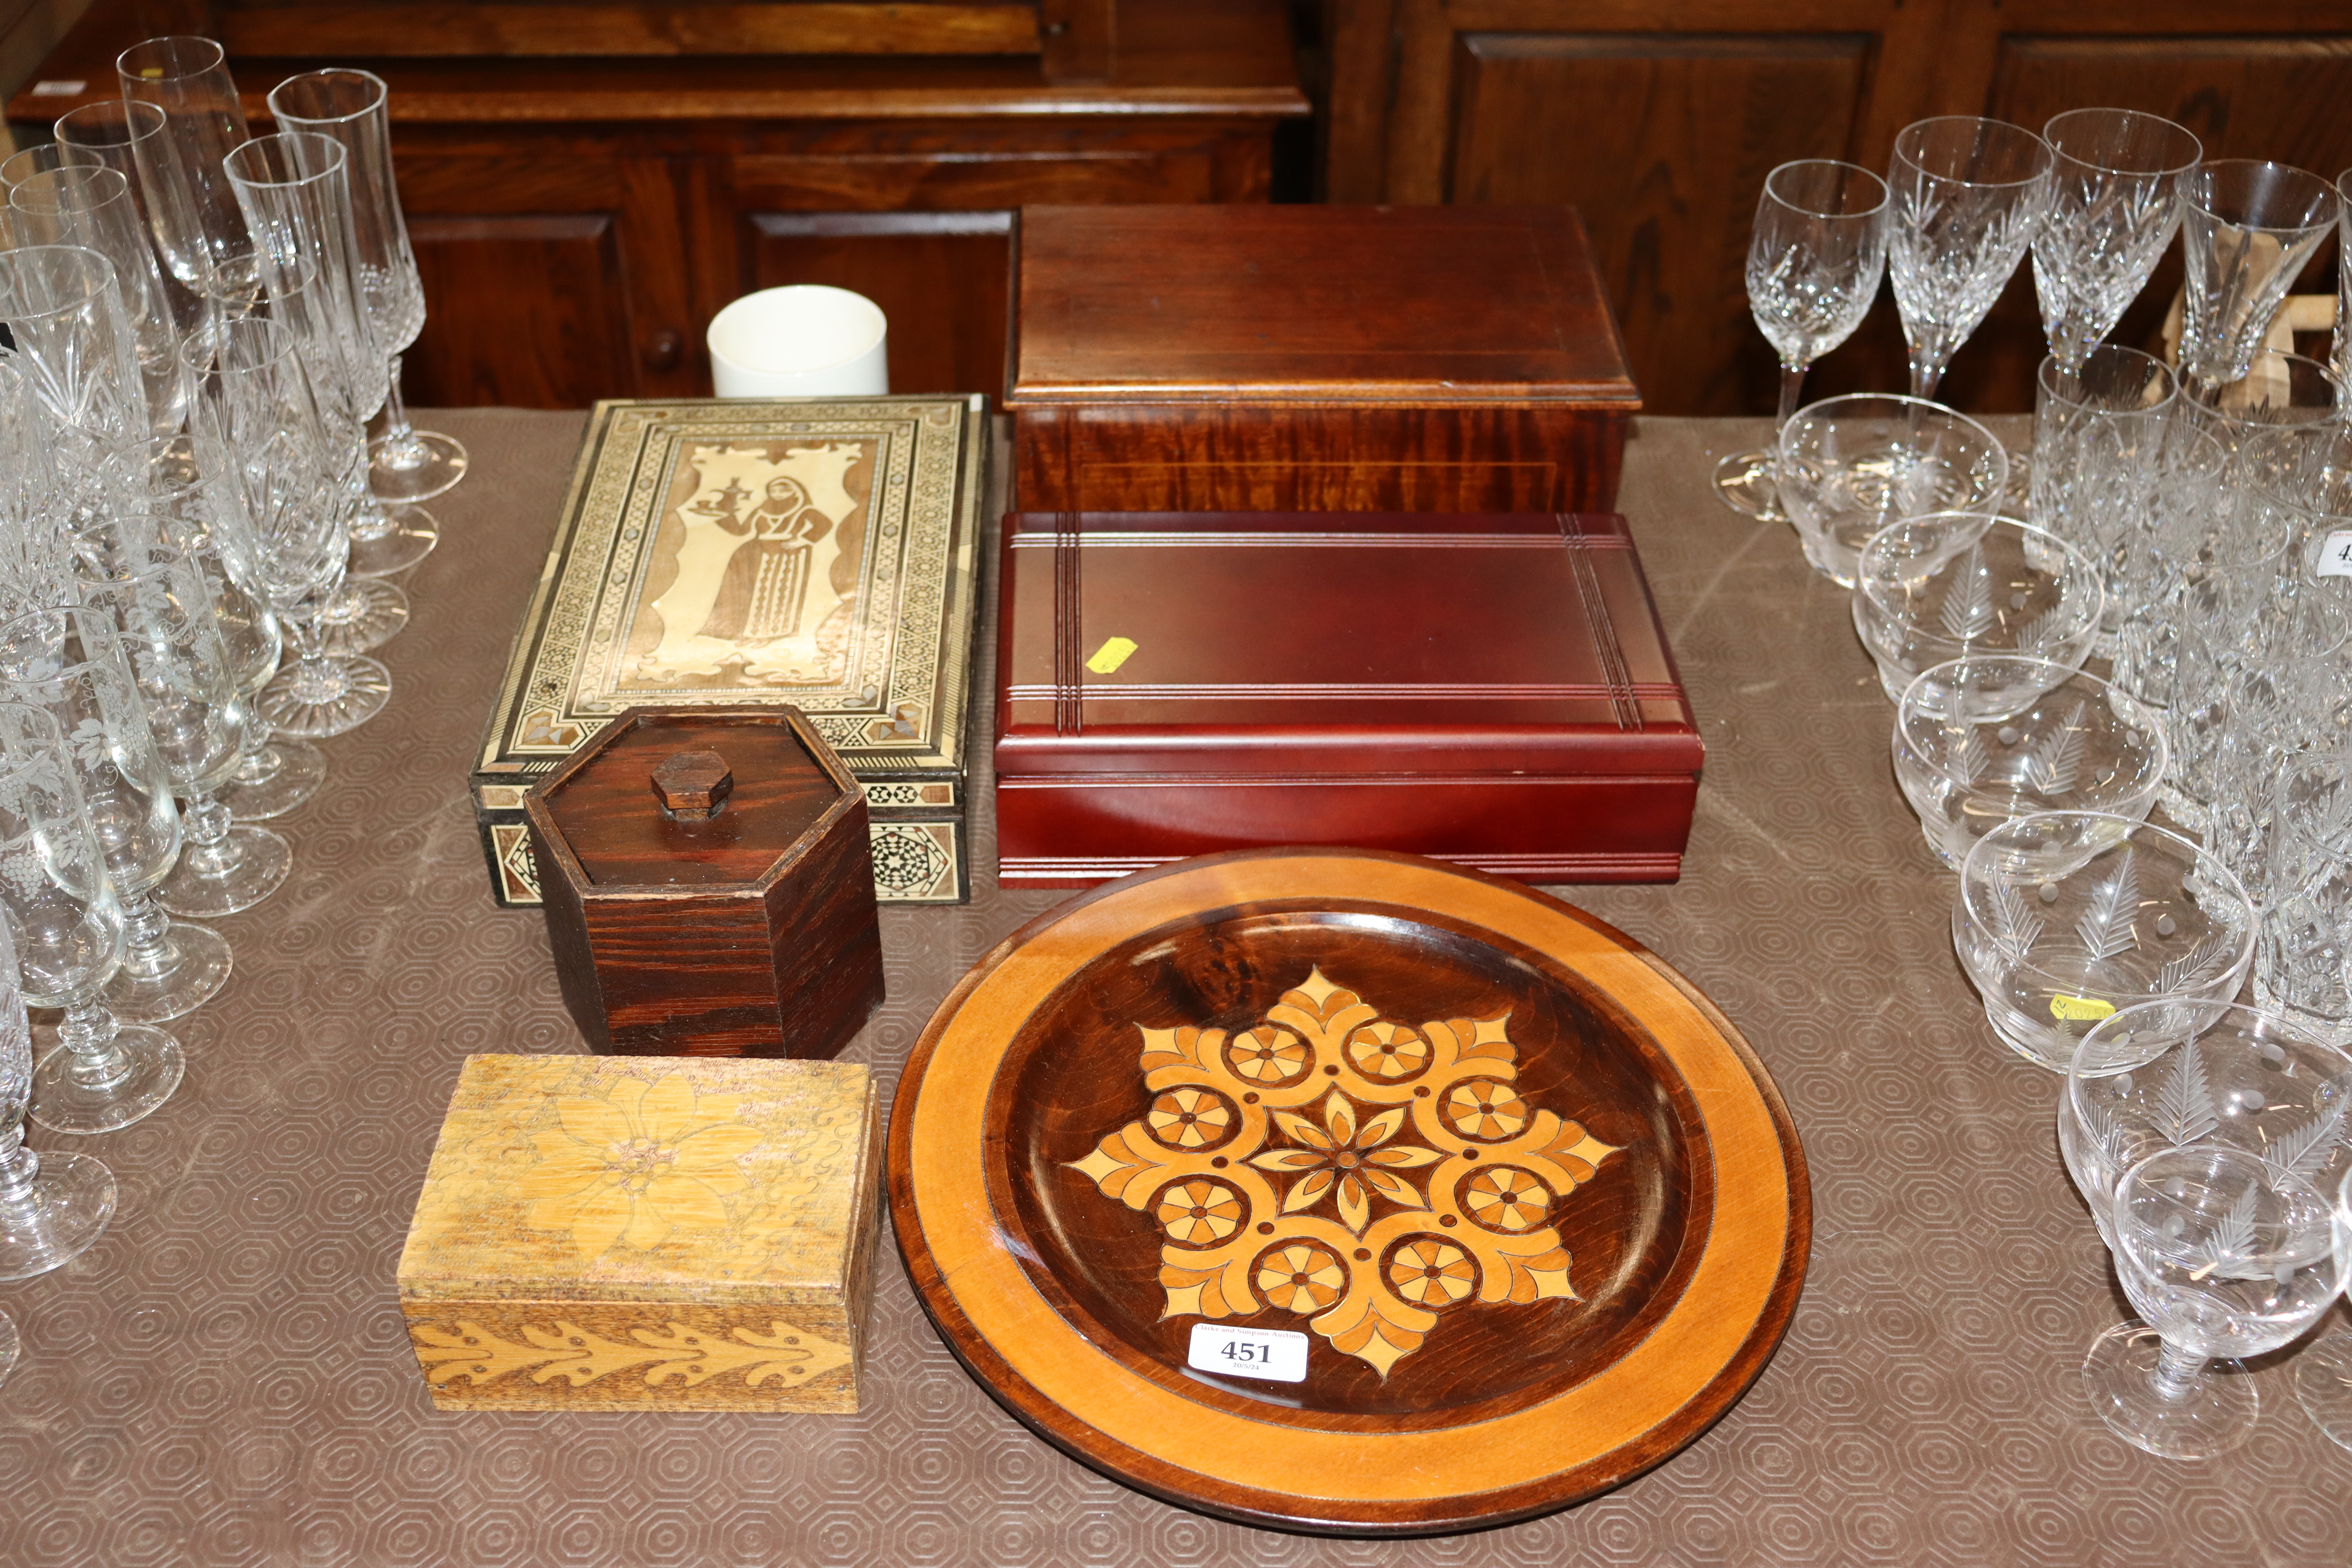 A decorative wooden plate; a jewellery box and var